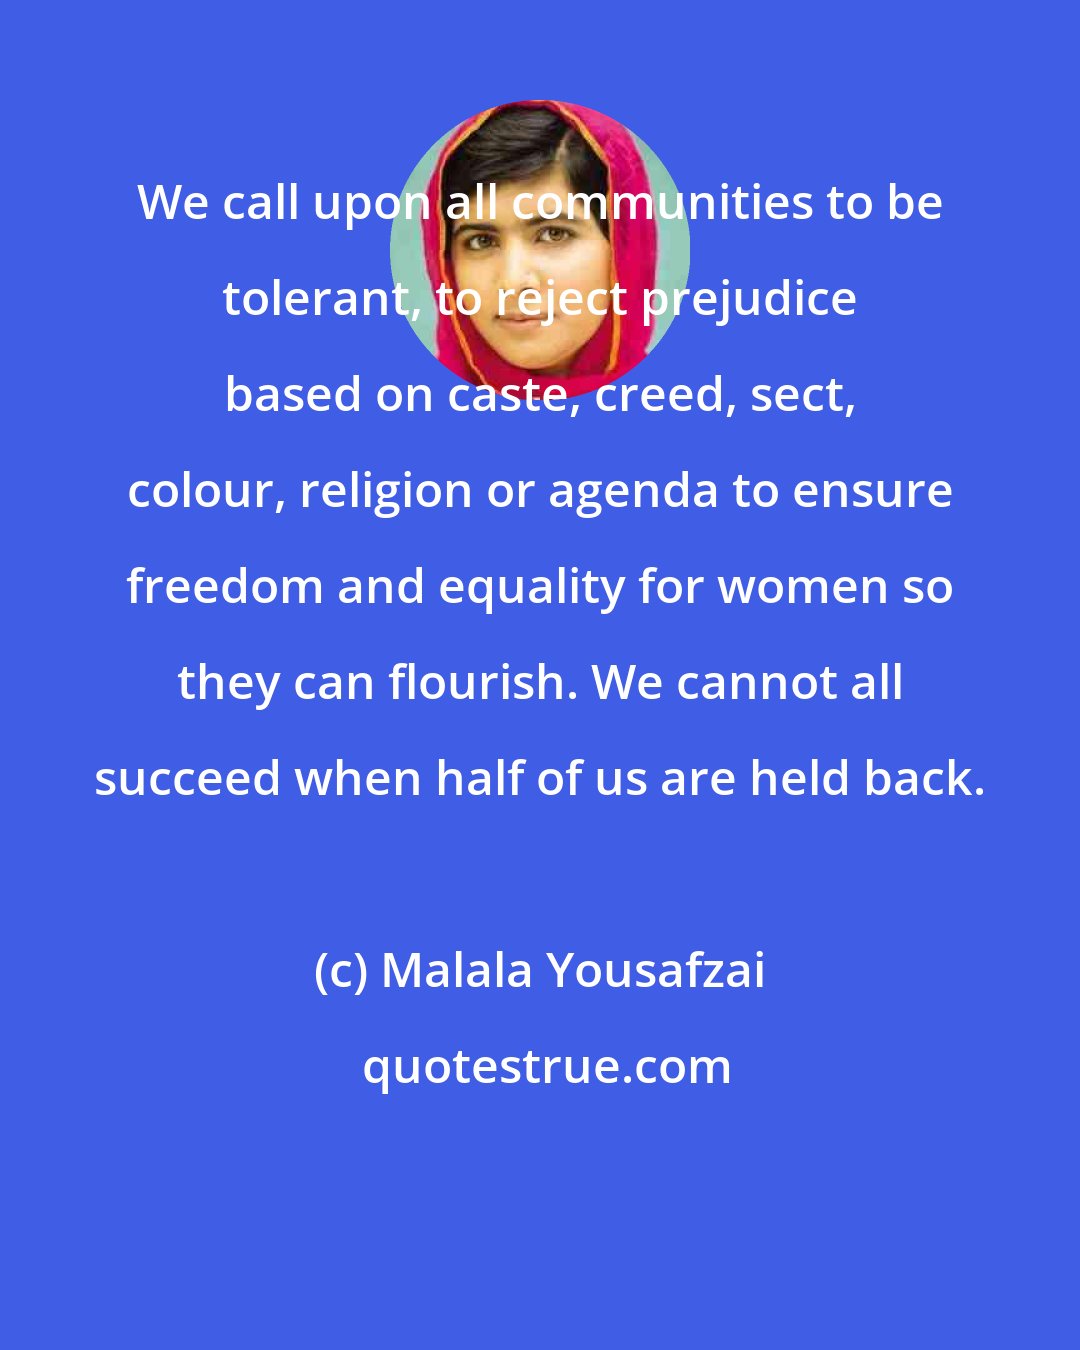 Malala Yousafzai: We call upon all communities to be tolerant, to reject prejudice based on caste, creed, sect, colour, religion or agenda to ensure freedom and equality for women so they can flourish. We cannot all succeed when half of us are held back.